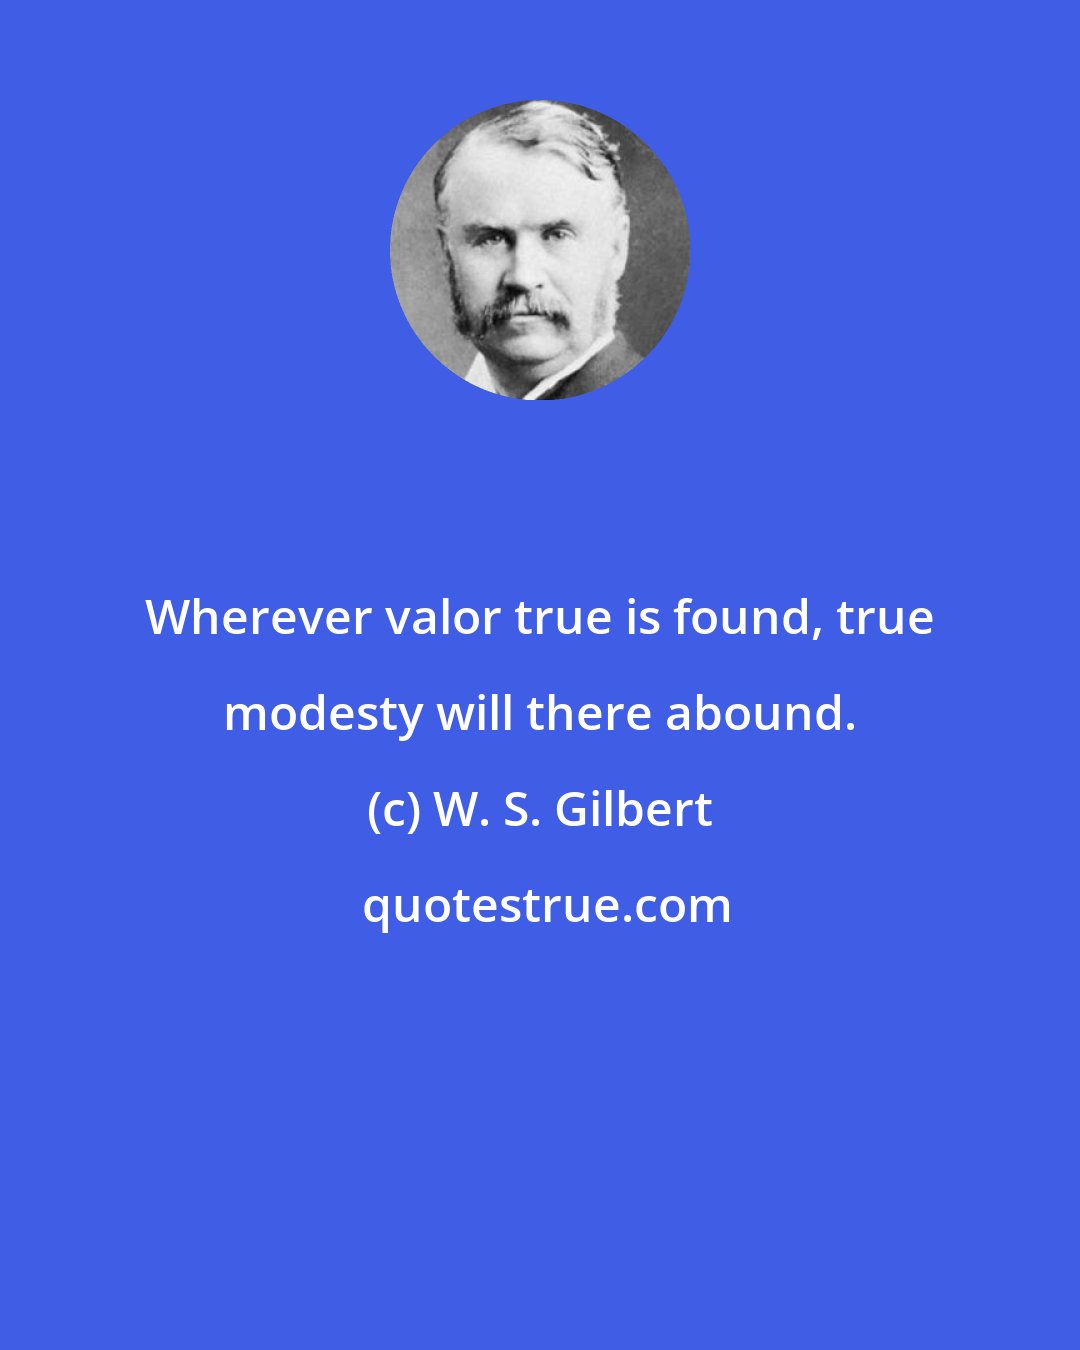 W. S. Gilbert: Wherever valor true is found, true modesty will there abound.